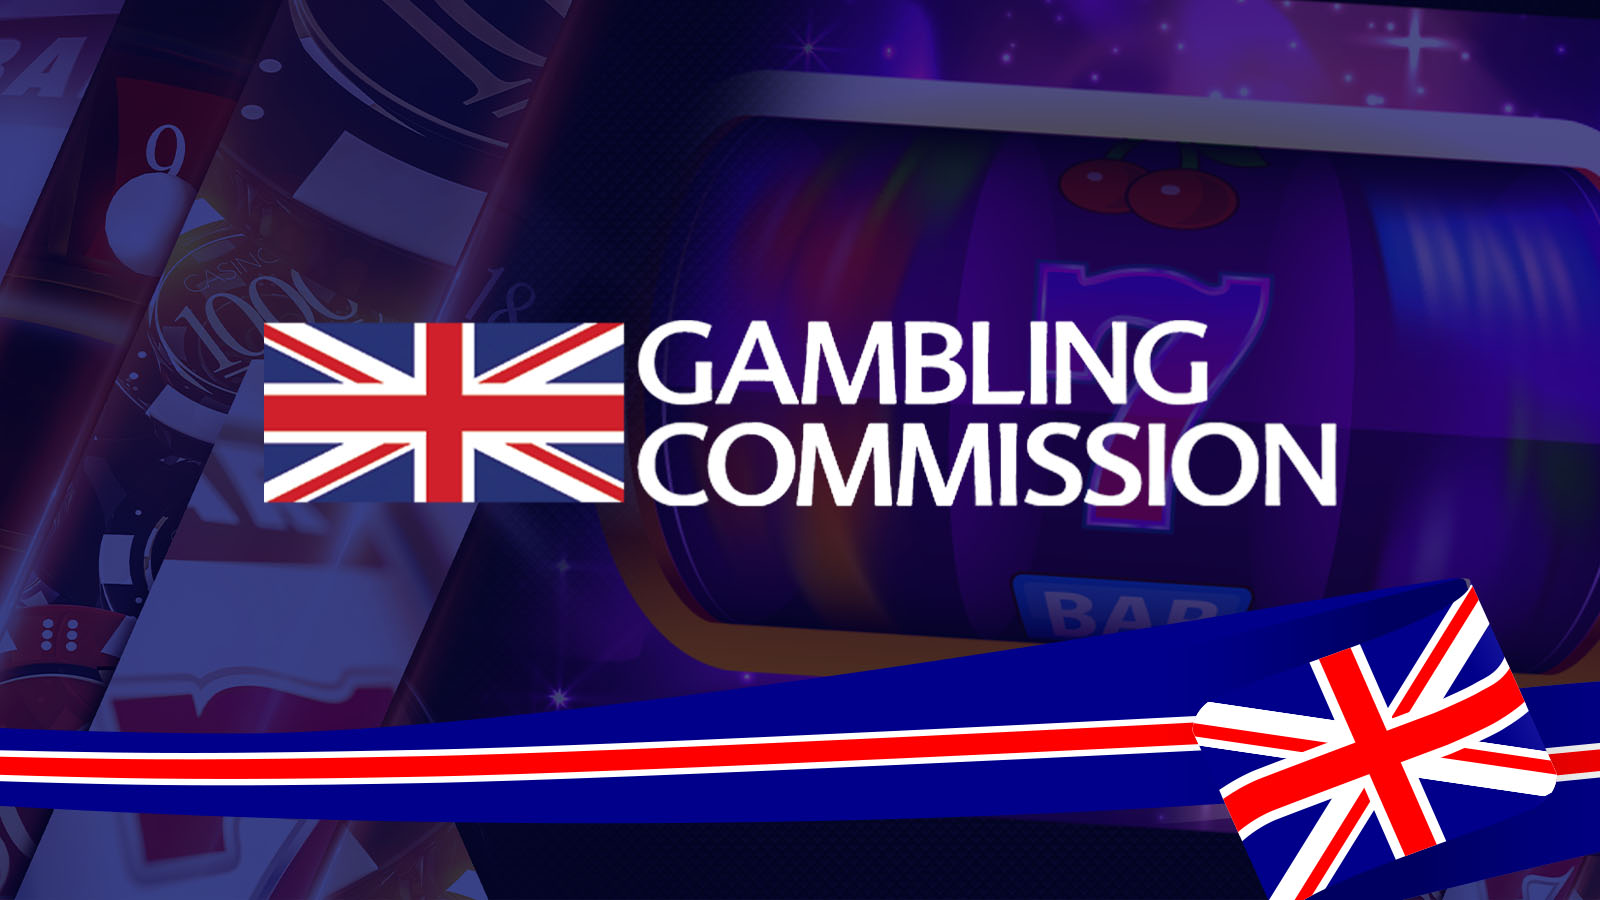 UK Gambling Commission-The Best license for fair play and responsible gaming